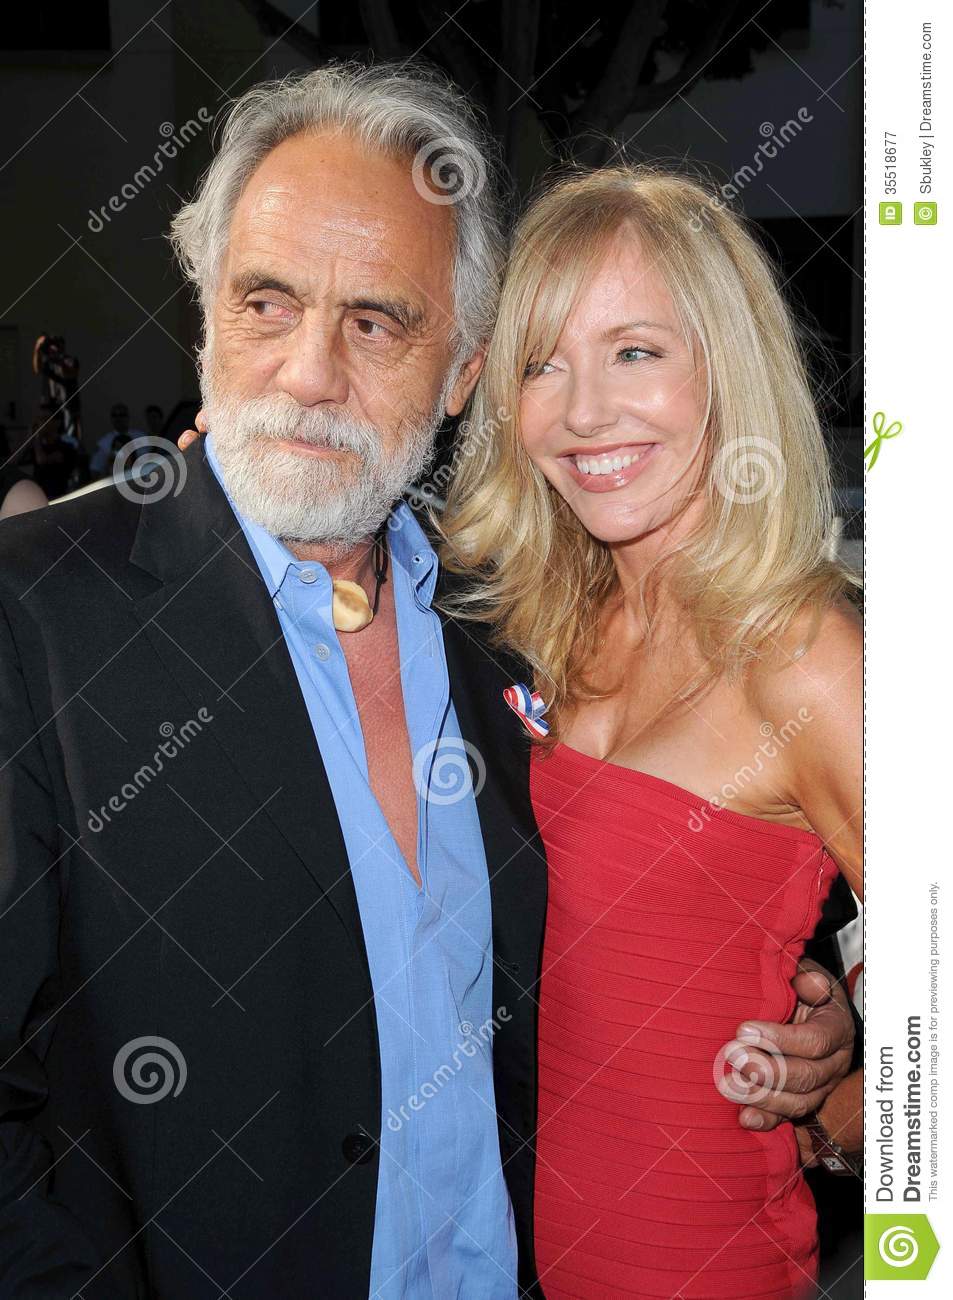 shelby-chong-pictures